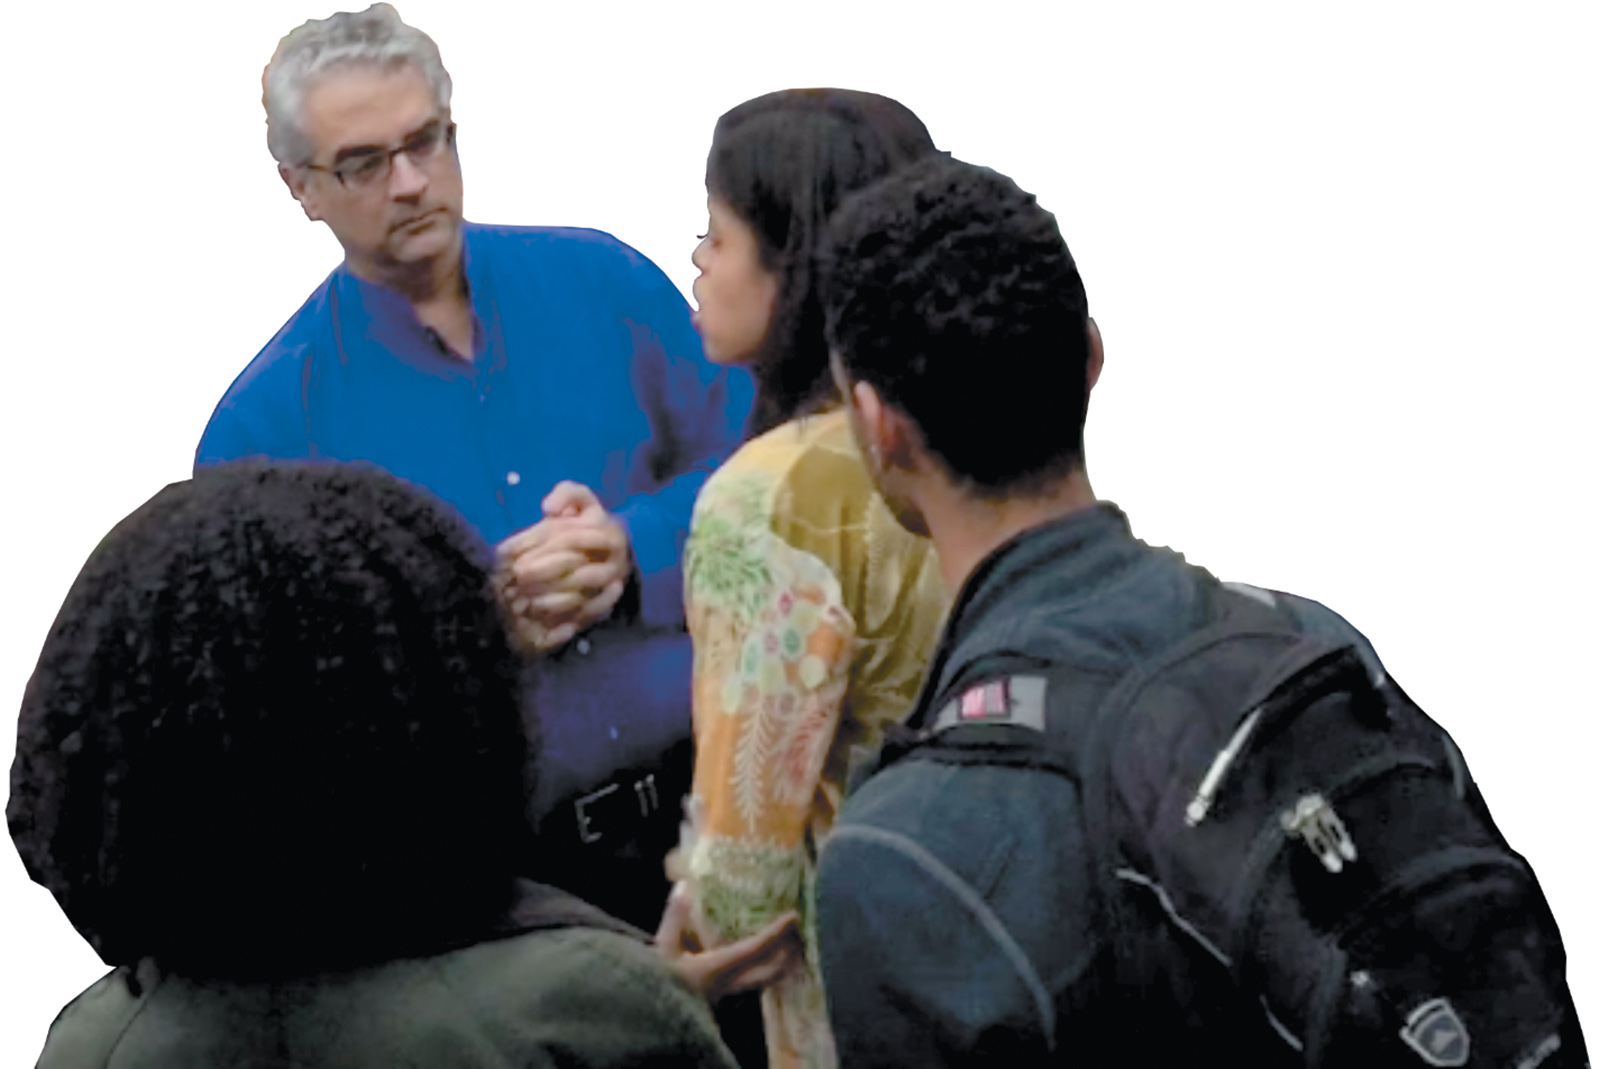 A still from the video showing Nicholas Christakis being confronted by Yale students, November 5, 2015